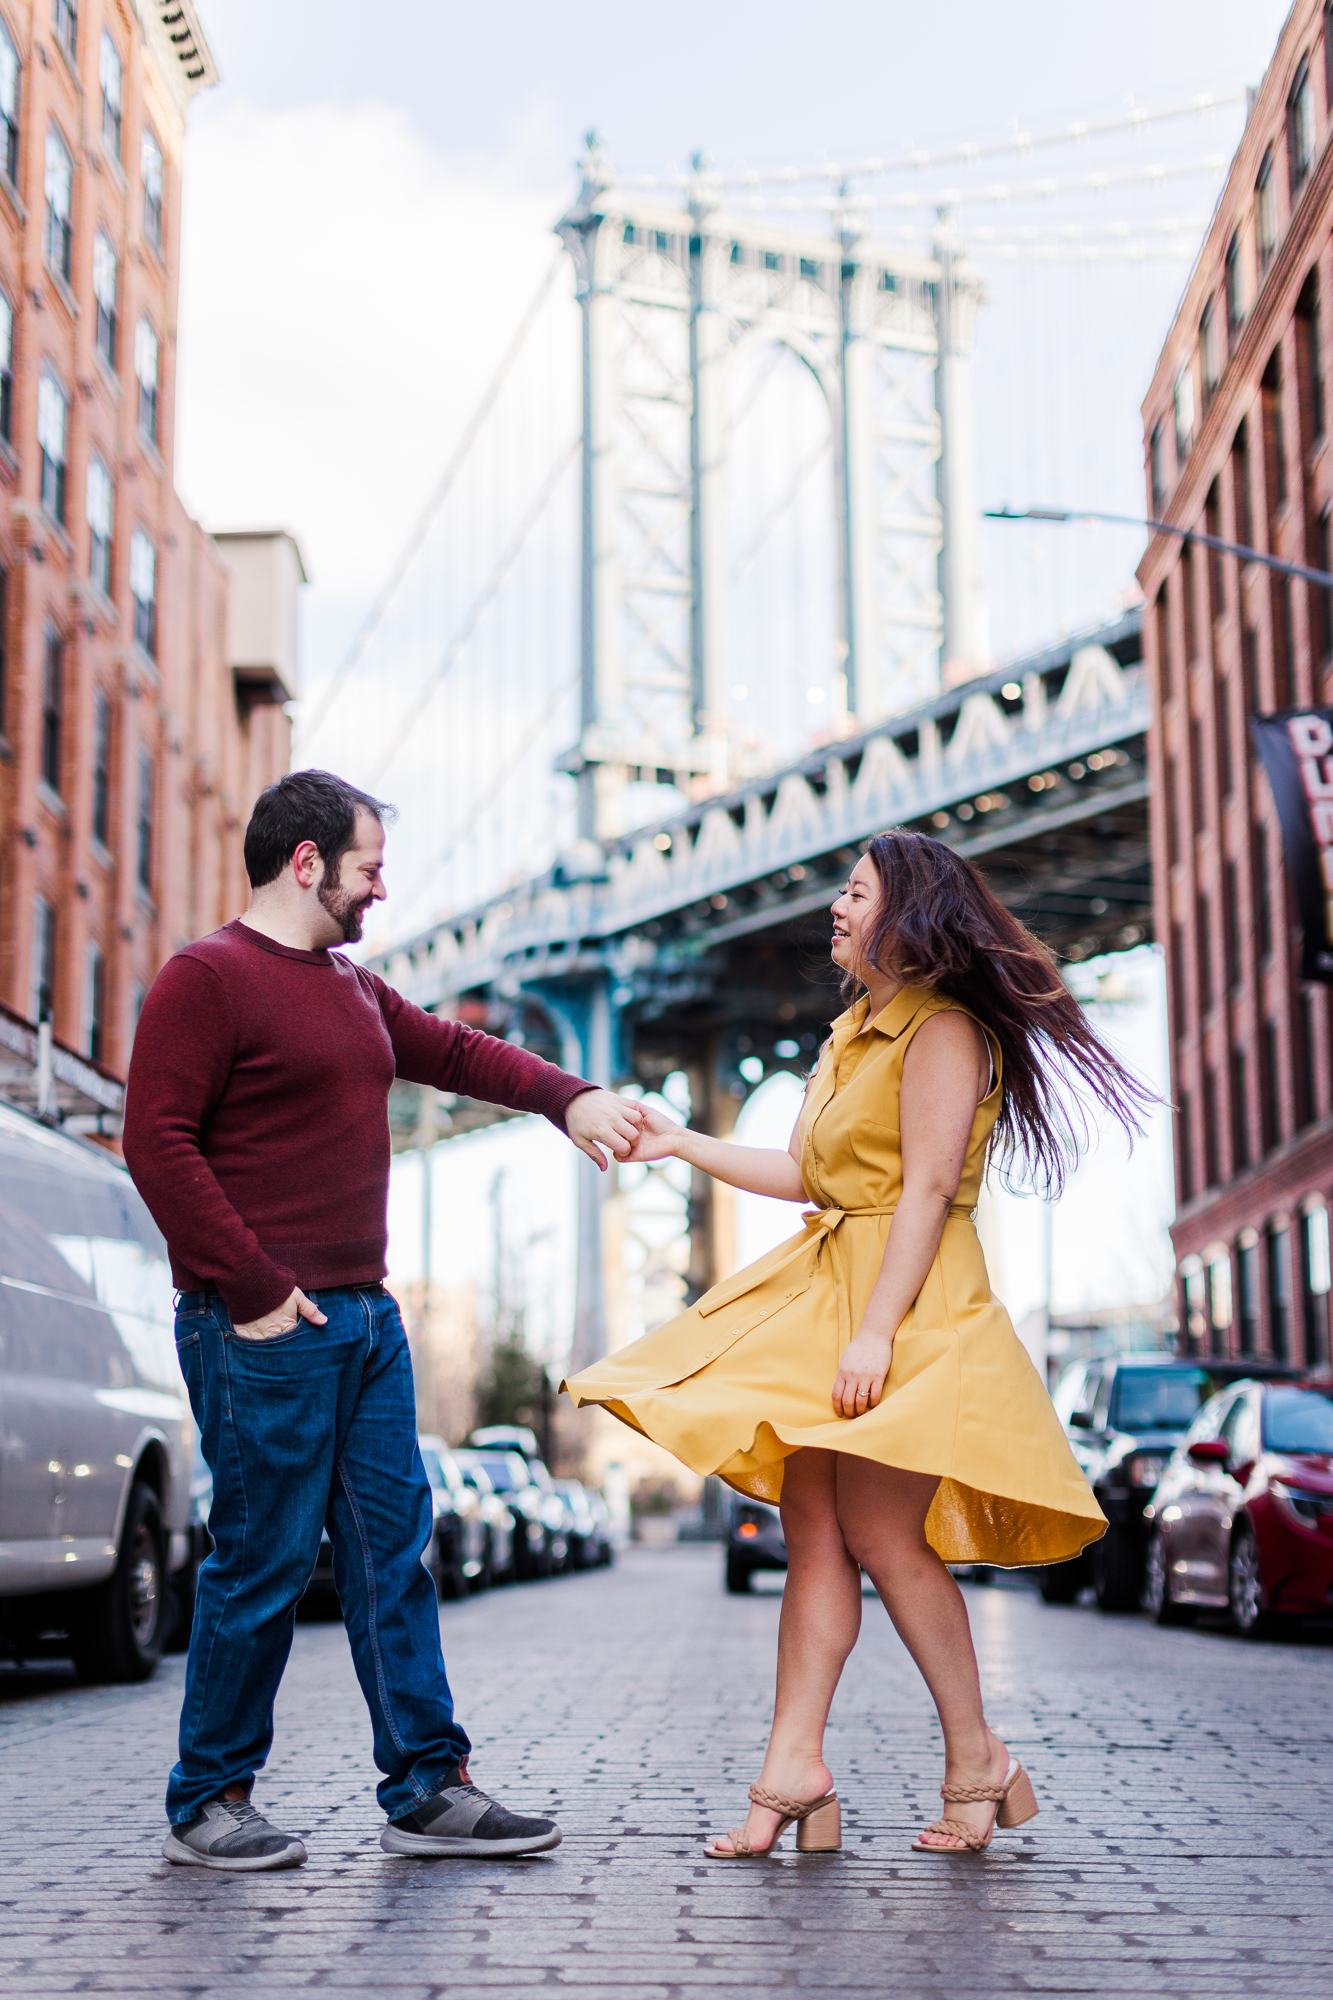 Stunning Brooklyn Bridge Engagement Photography with Matching Outfits